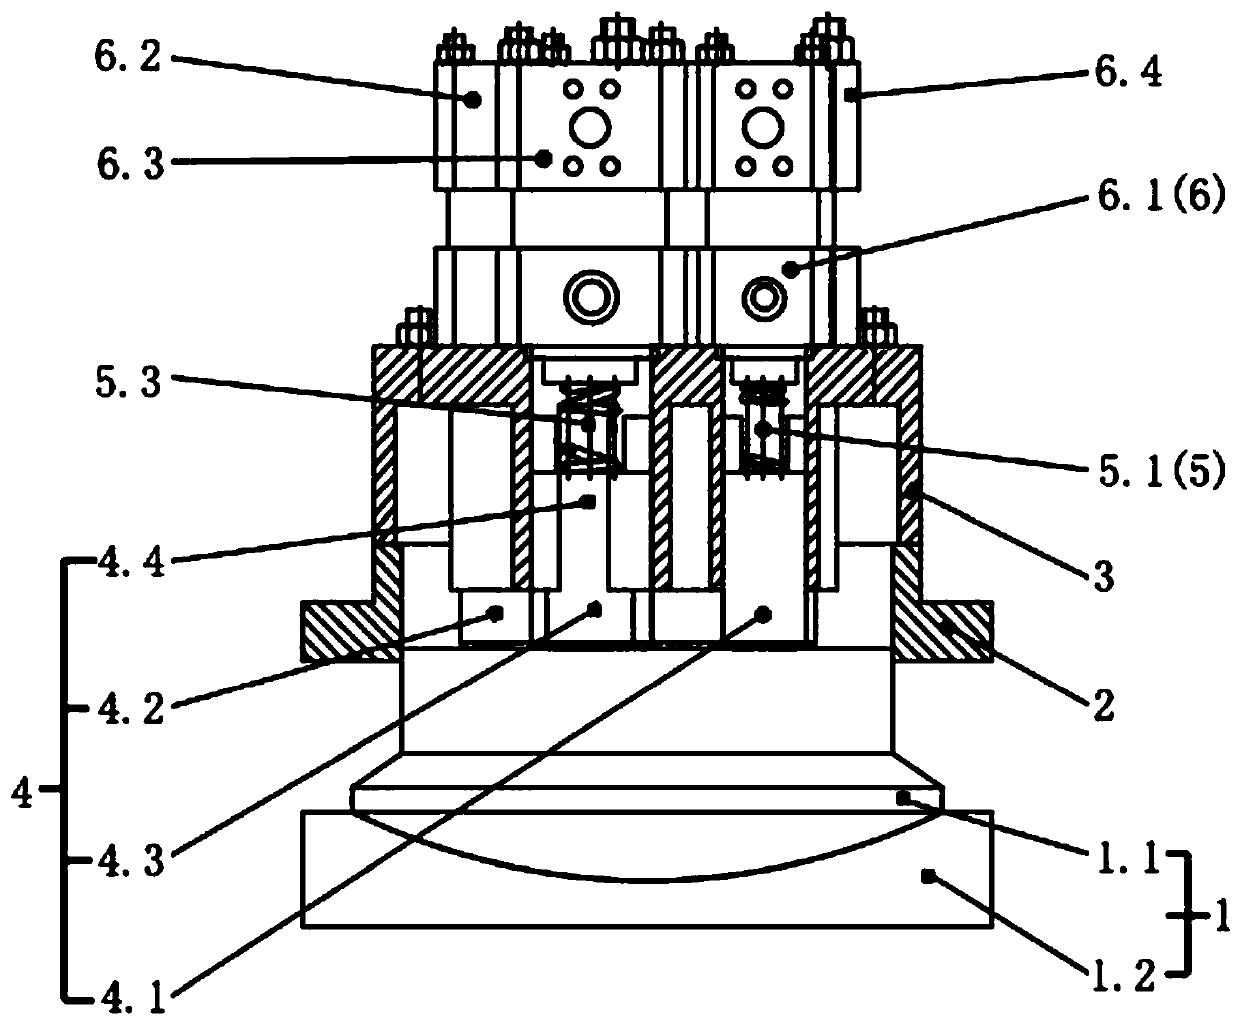 A digital electro-hydraulic loading device and loading method suitable for large load intervals